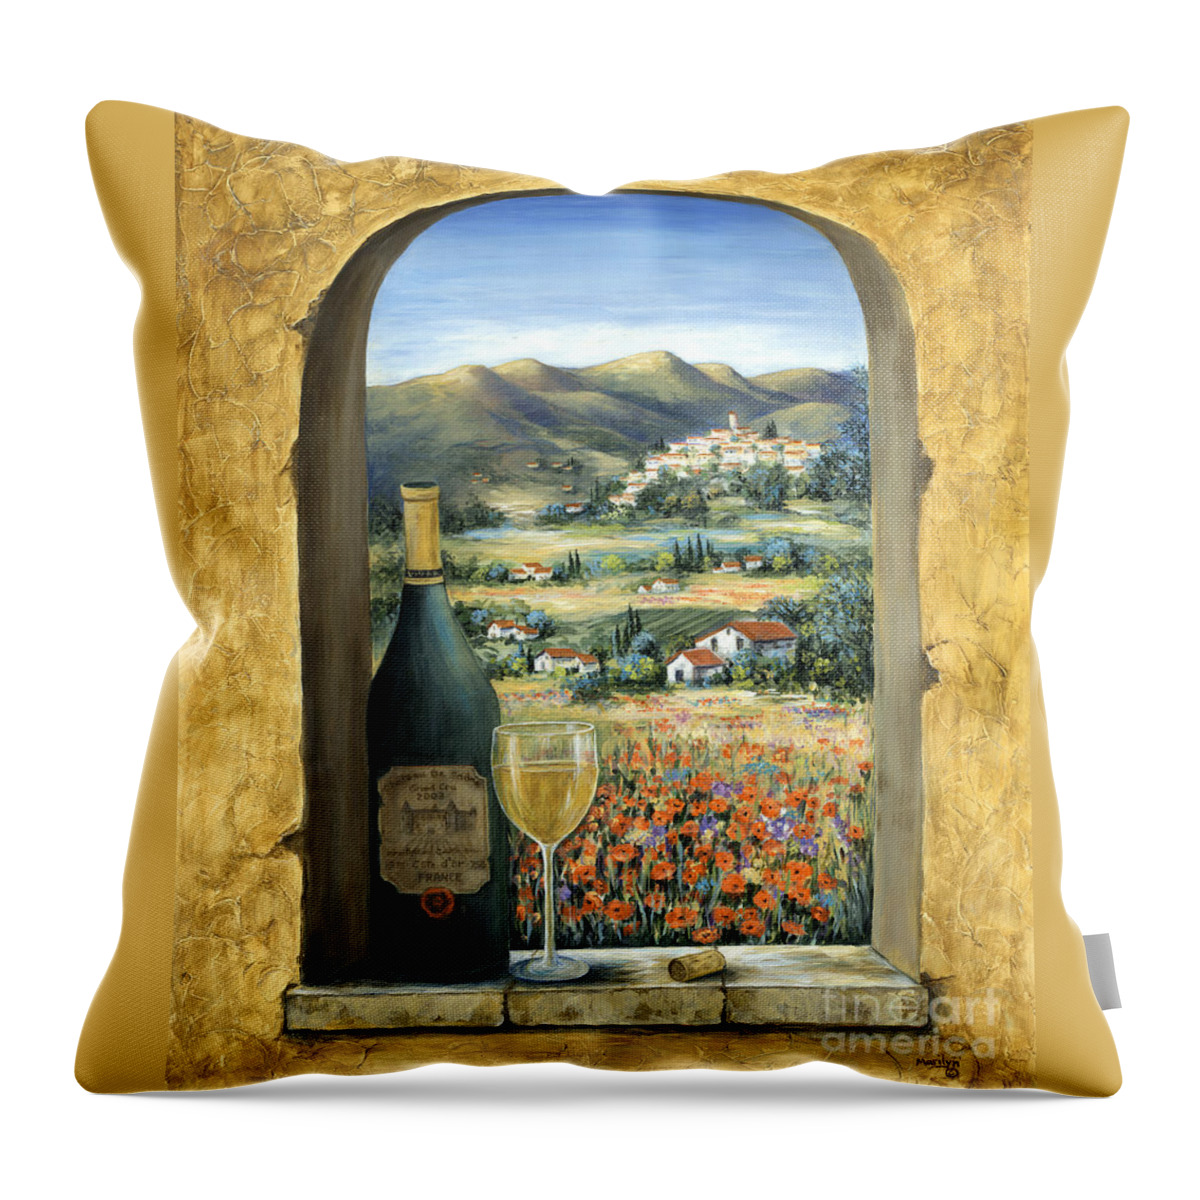 #faatoppicks Throw Pillow featuring the painting Wine And Poppies by Marilyn Dunlap